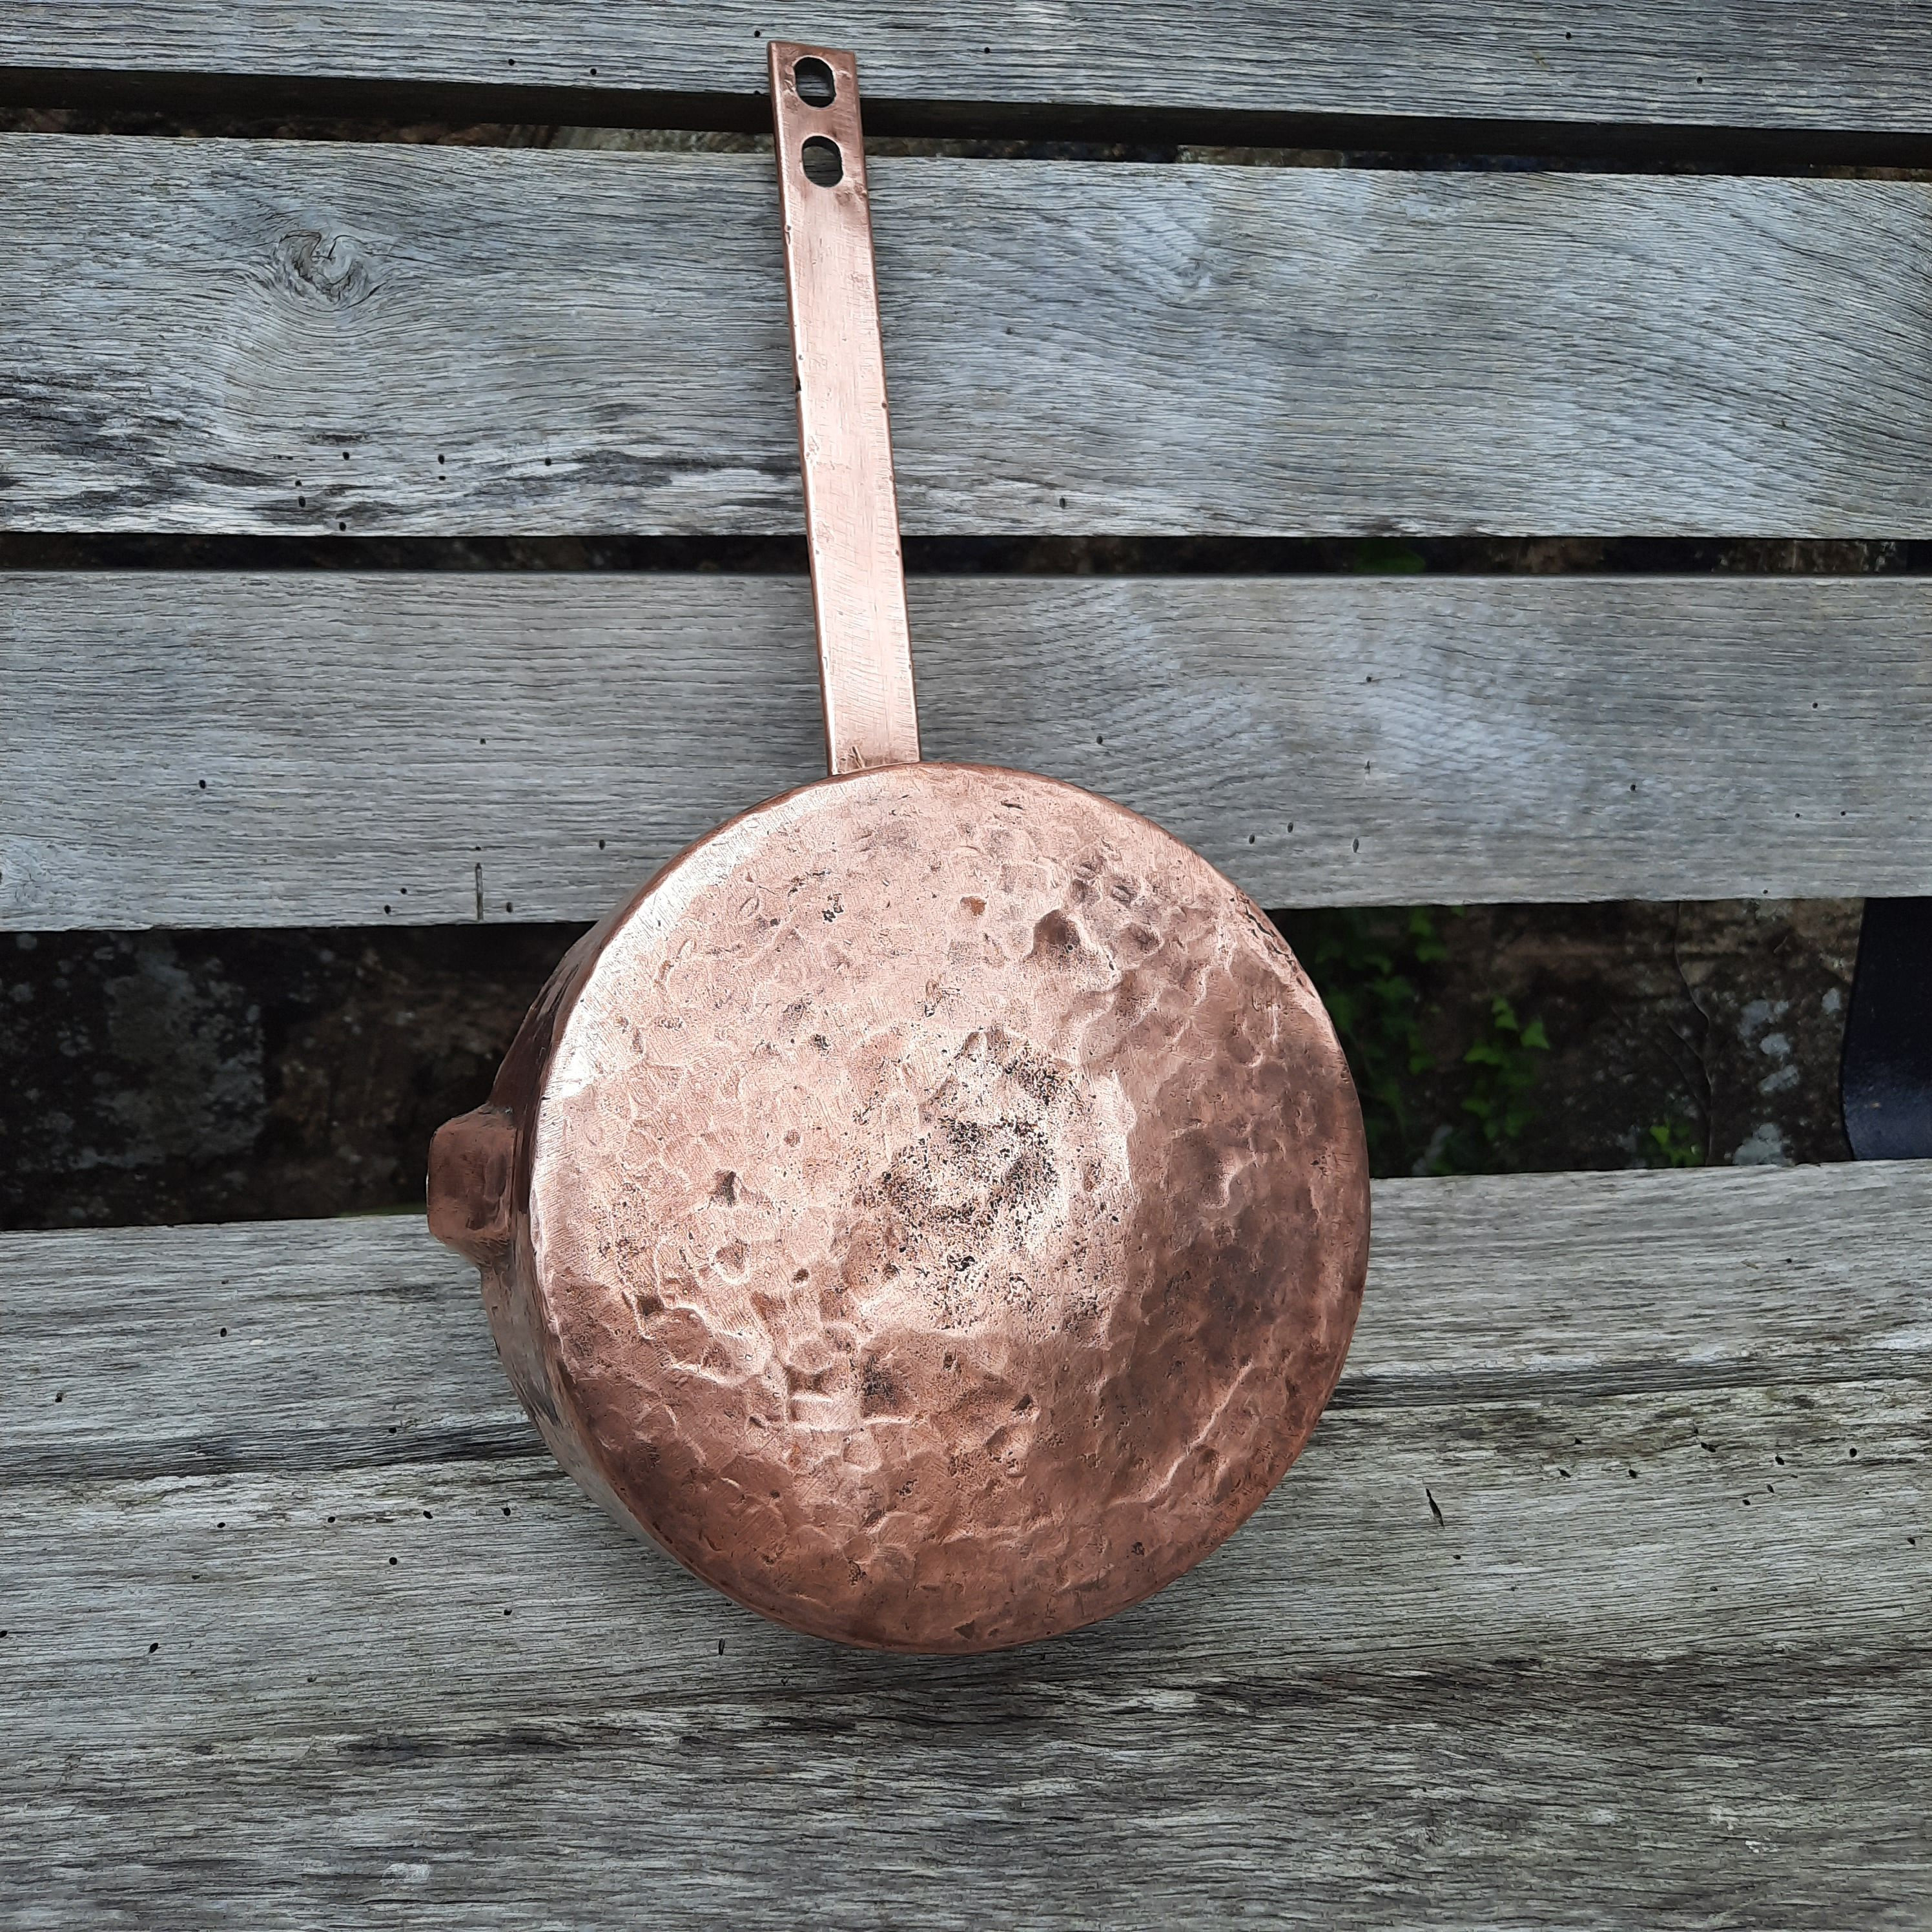 Small Hammered Copper Saucepan 4.7 - Chef Tool